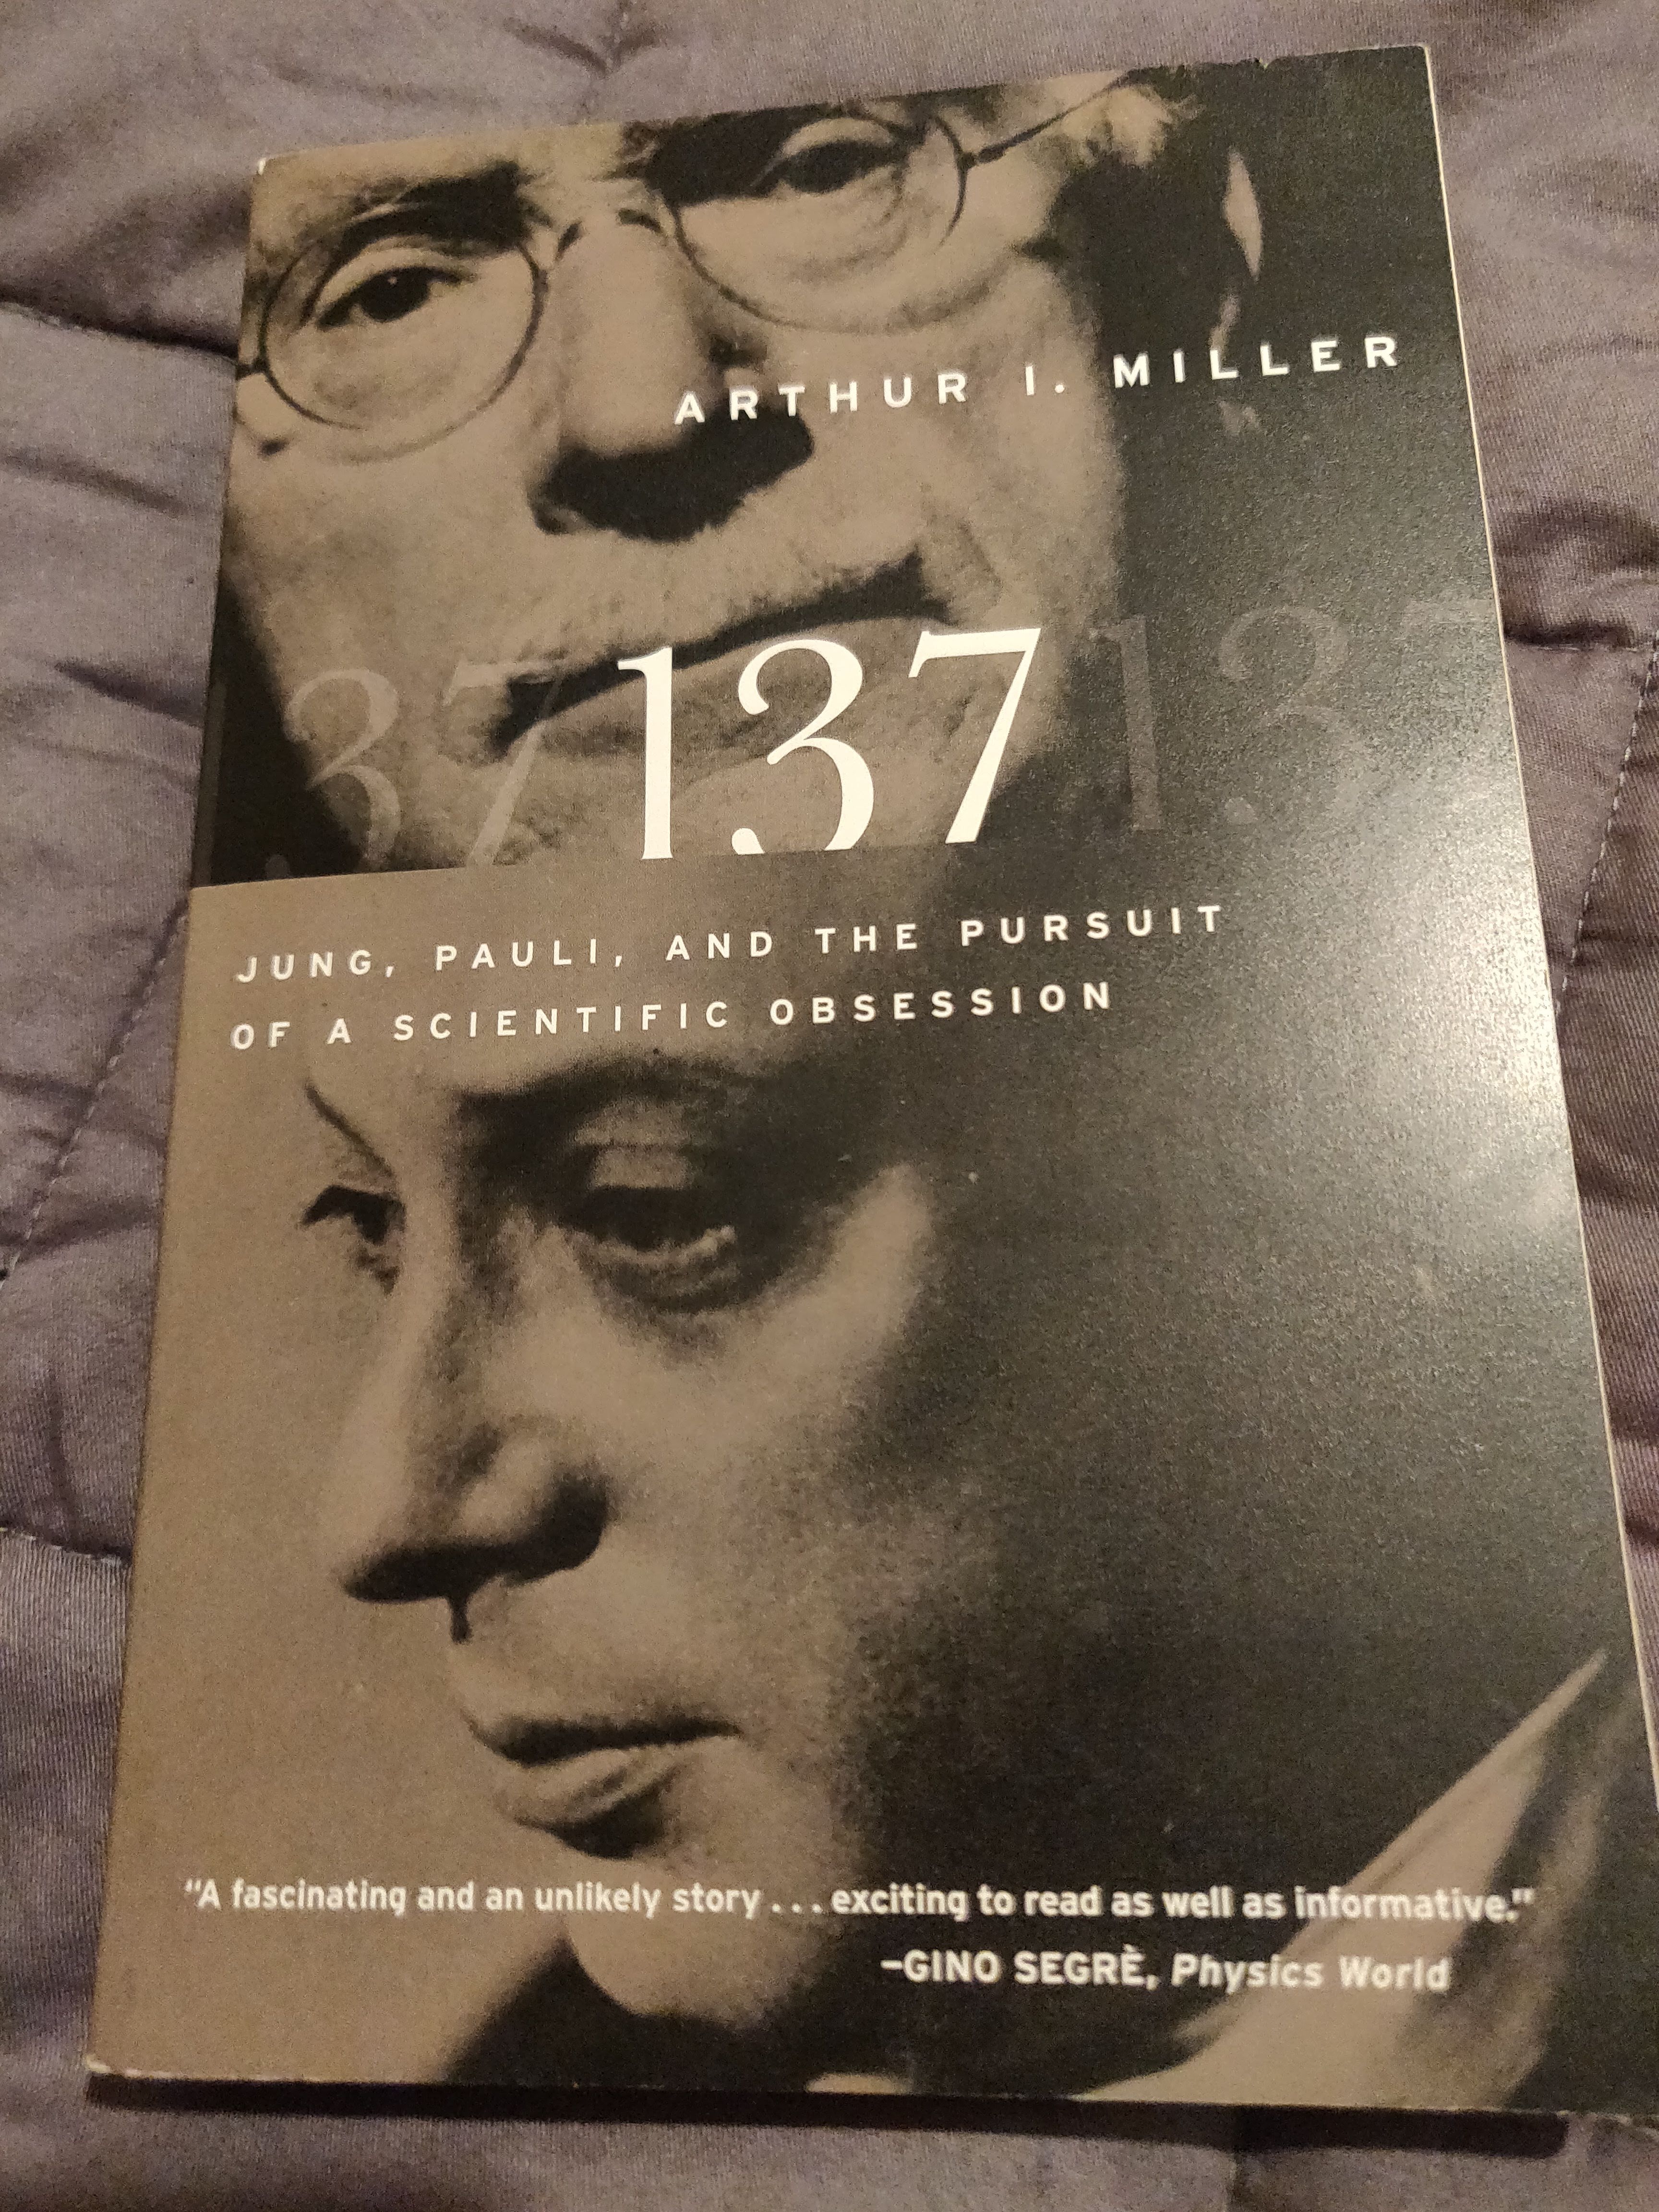 Book titled 137, given as a tribute to the leader